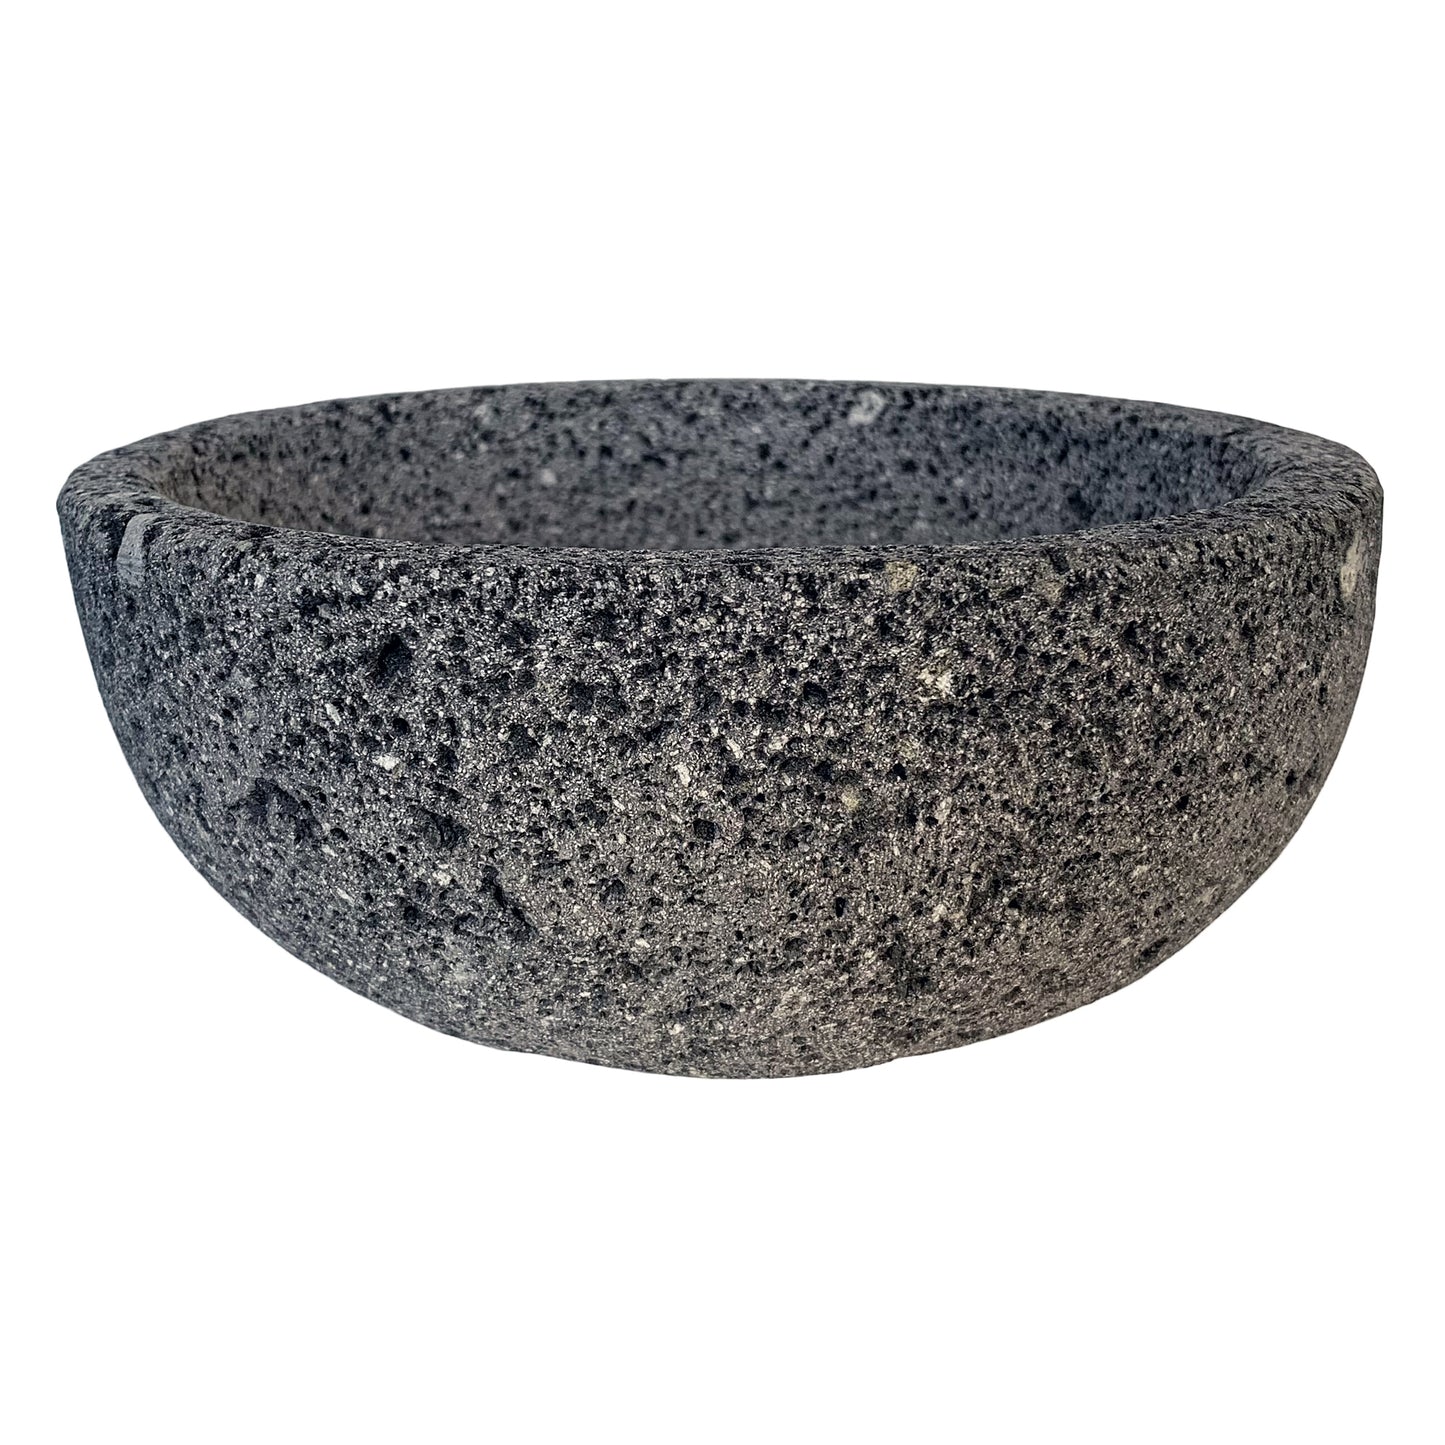 Large (12 inch) Mexican Molcajete Bowl  Hand-carved 100% Volcanic Sto –  The Curated Pantry